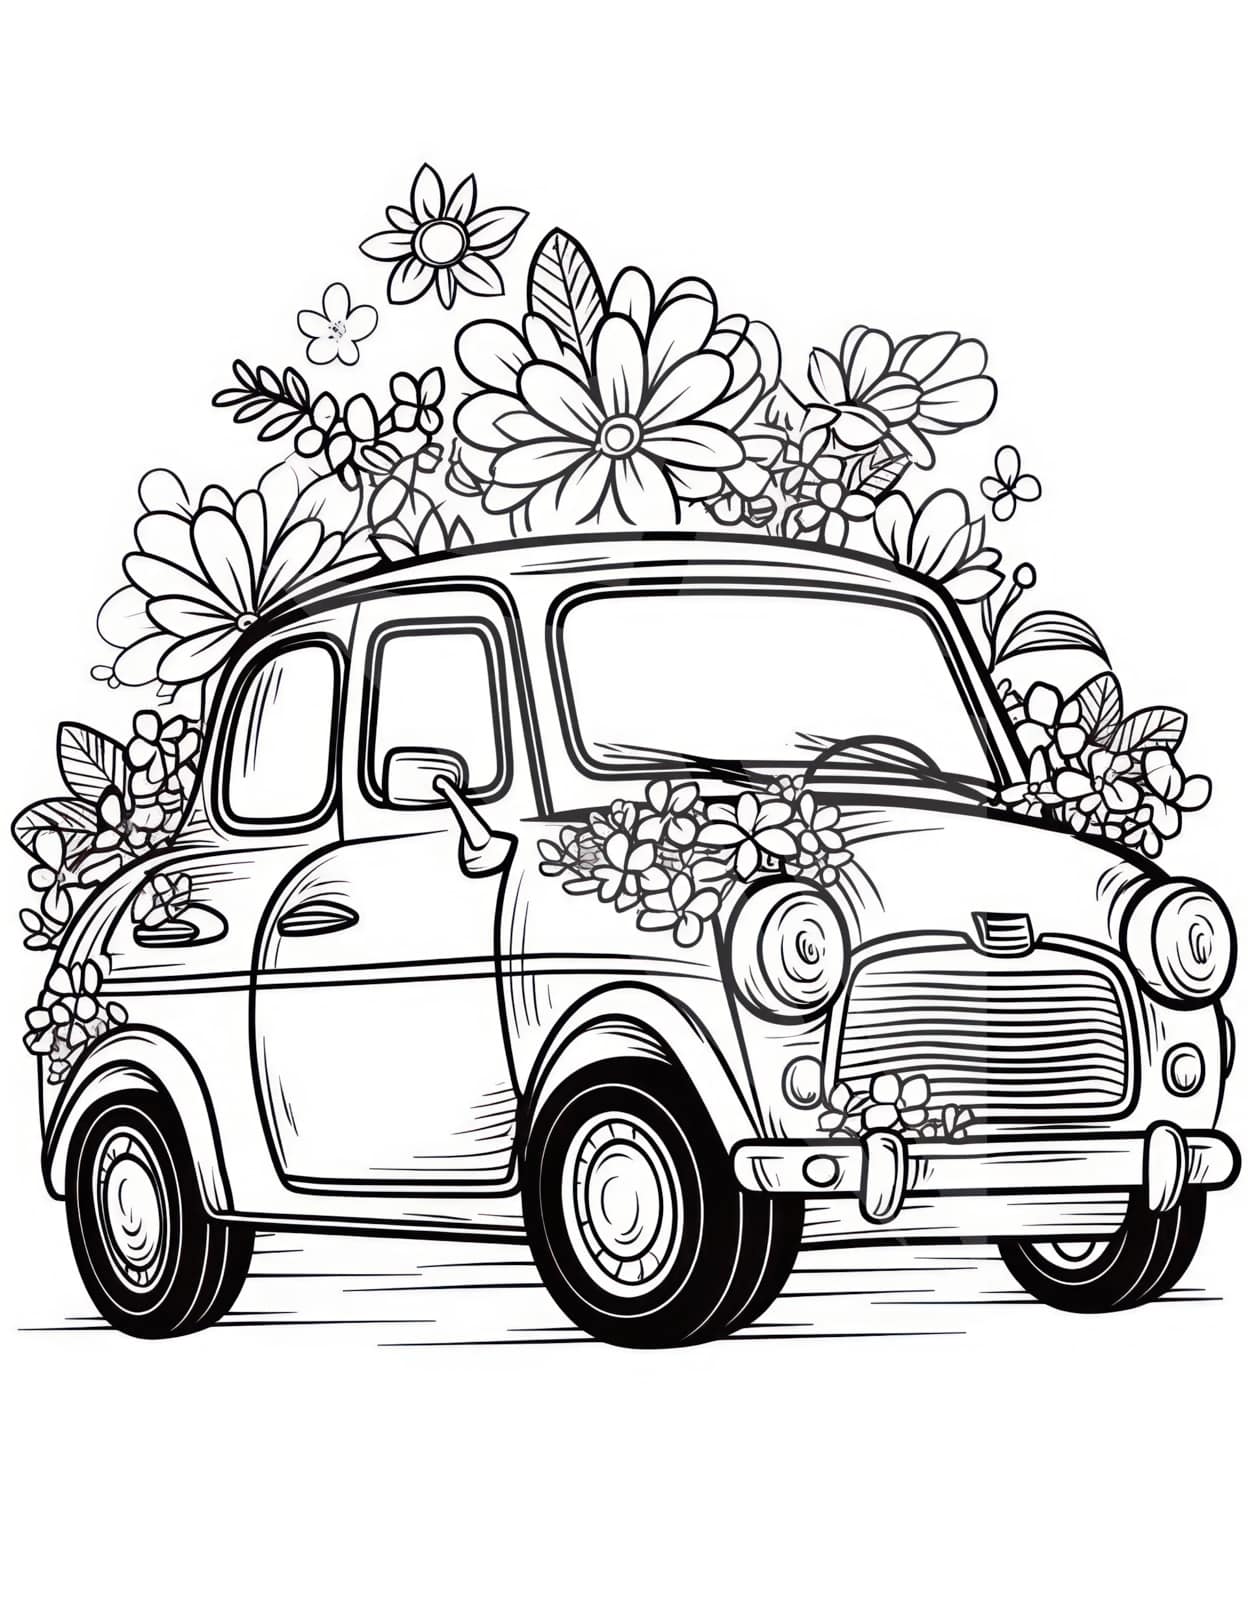 Car coloring pages for adults and kids